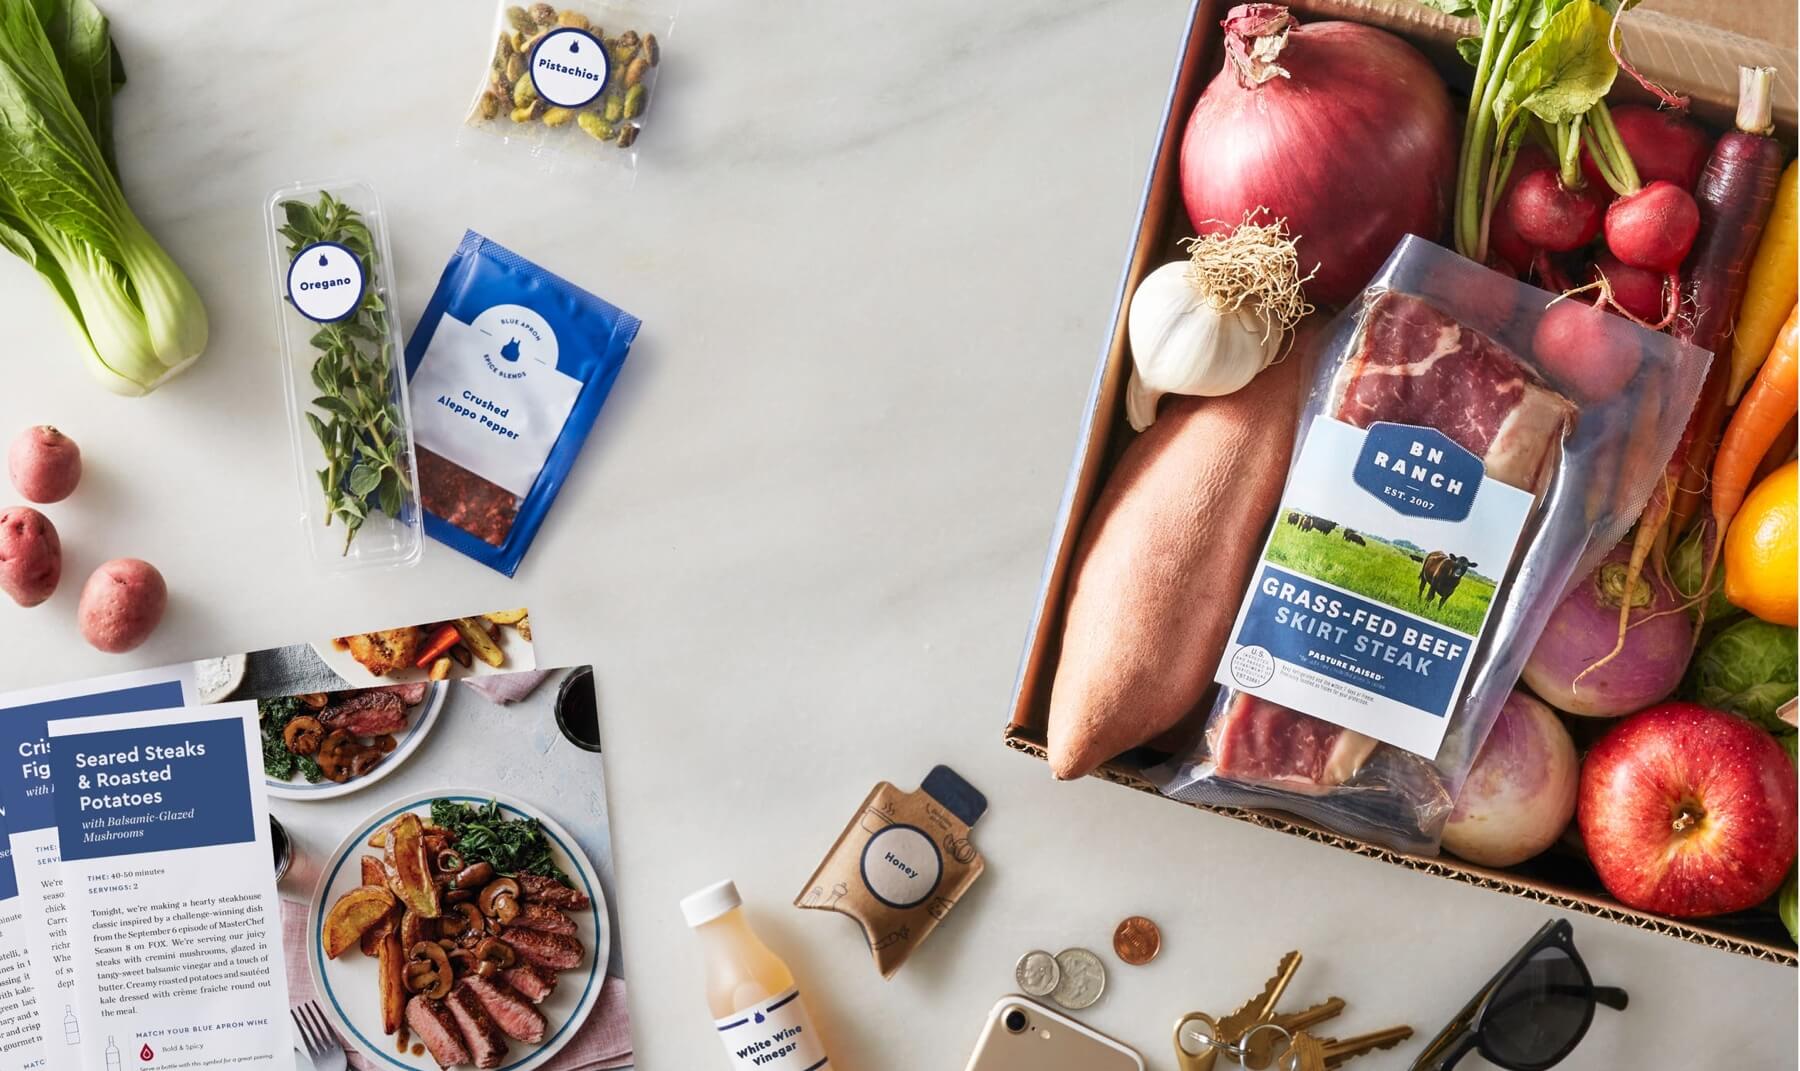 Best meal kit delivery services for men in 2019